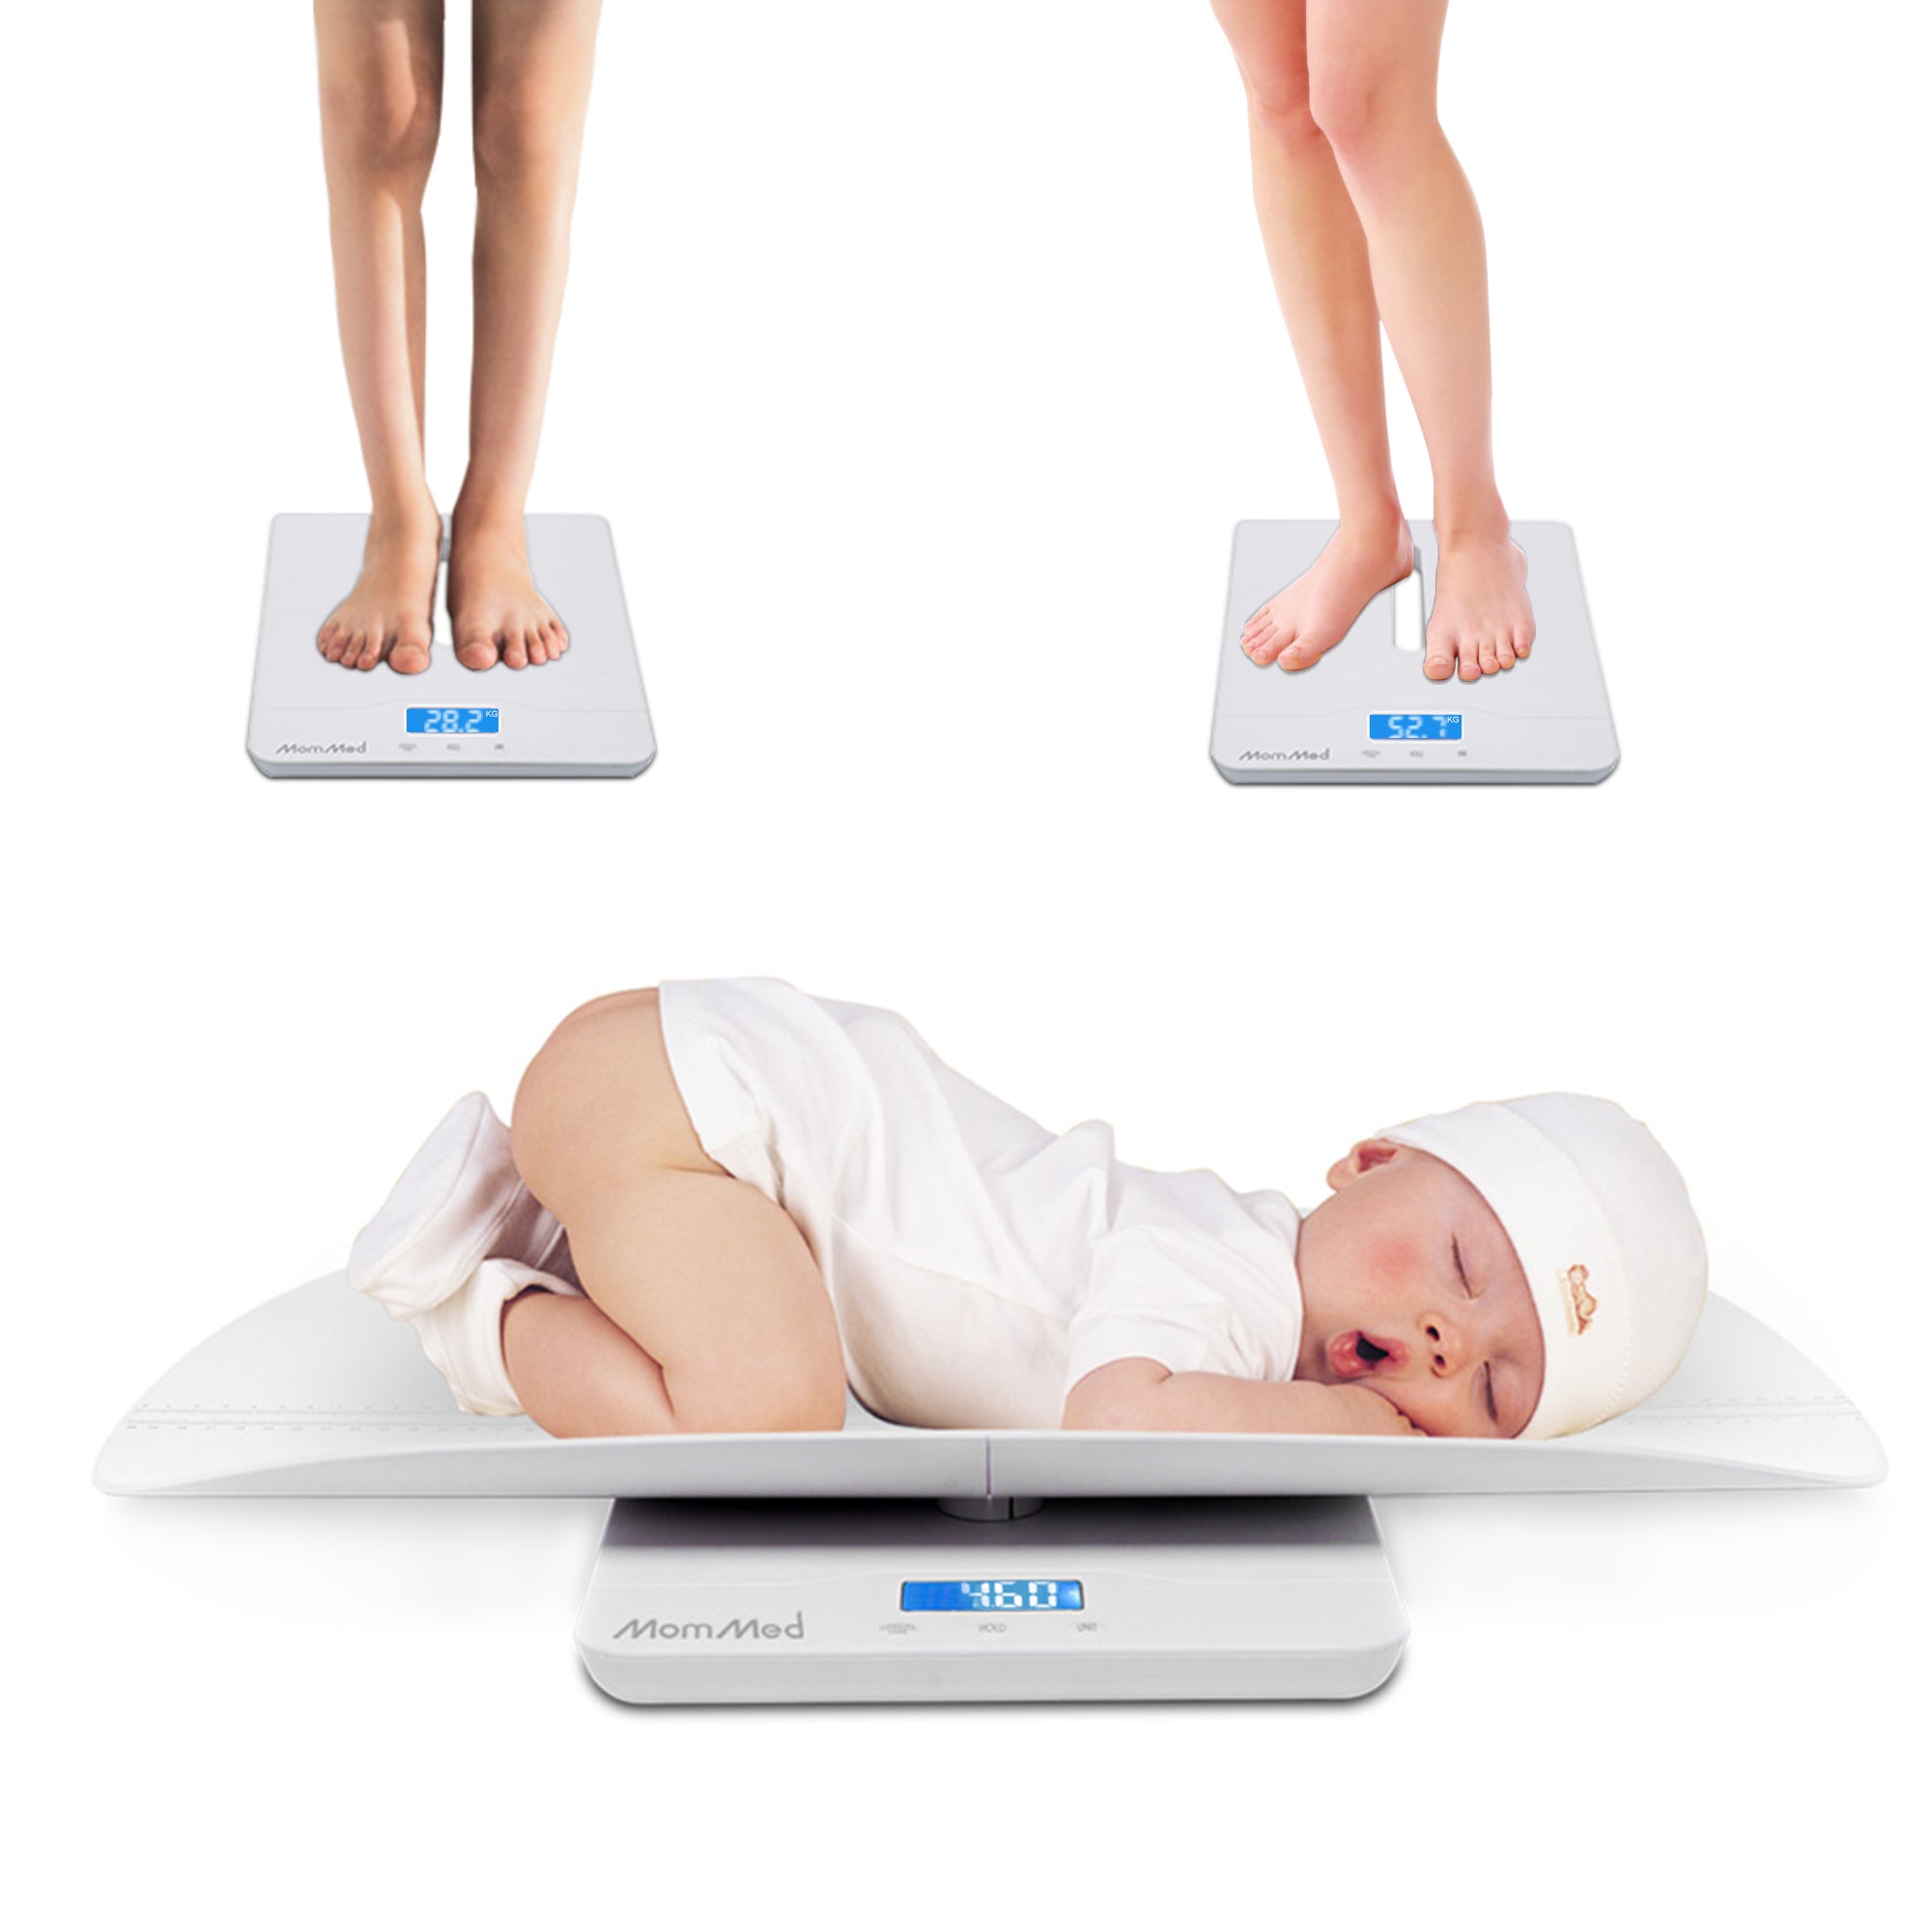 Cradle Baby Multi-Function Scale For Infants, Toddlers, Mom, and